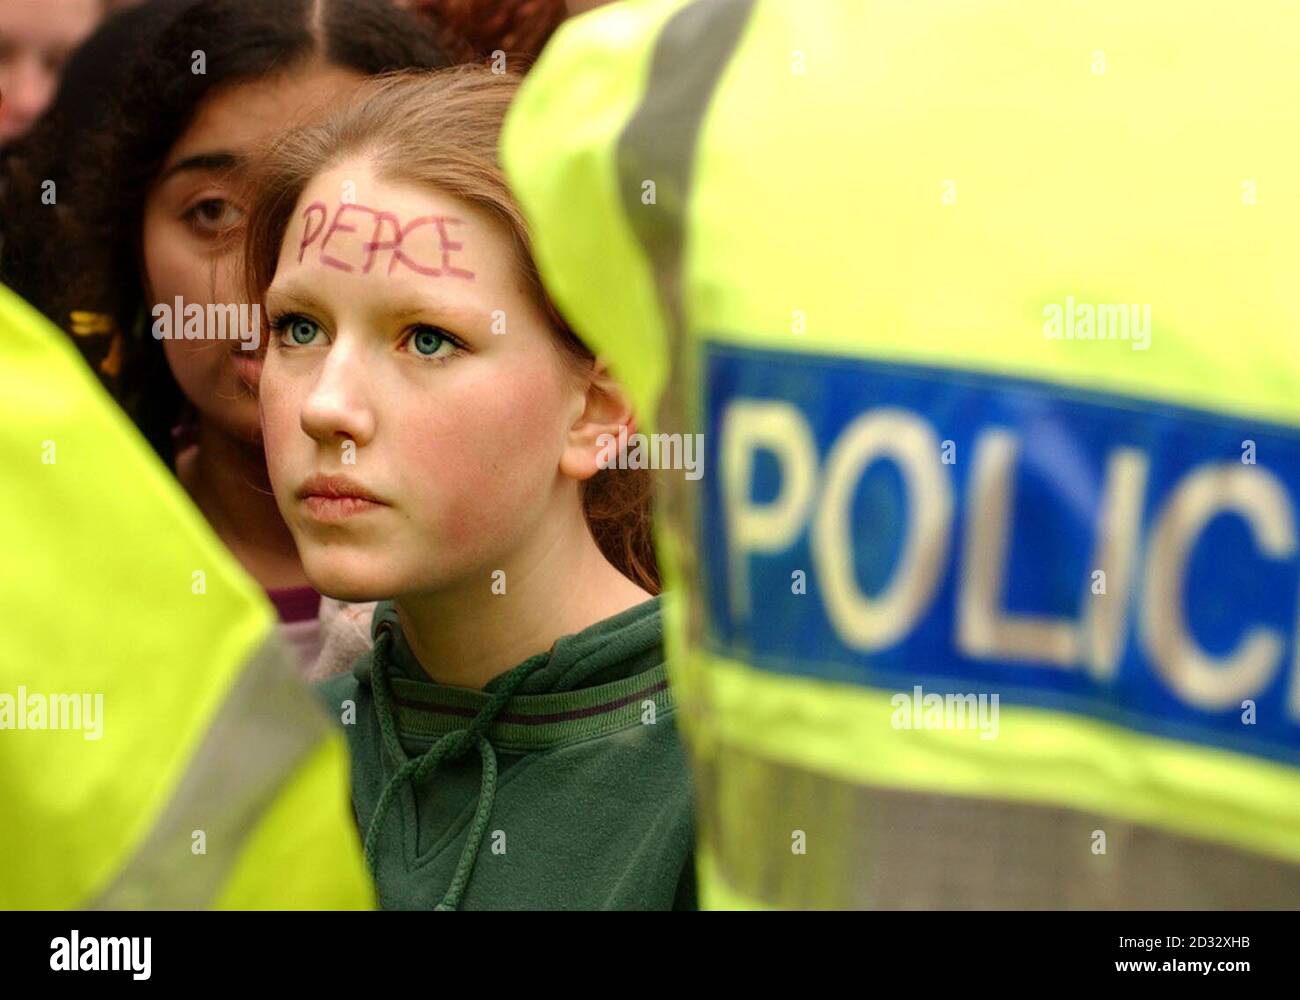 Anti-war protesters gather in Edinburgh. Hundreds of children skipped school to protest against looming war with Iraq by storming Edinburgh Castle. Around 250 school pupils and anti-war protesters forced their way past security guards and tried to rush into the historic landmark. Stock Photo